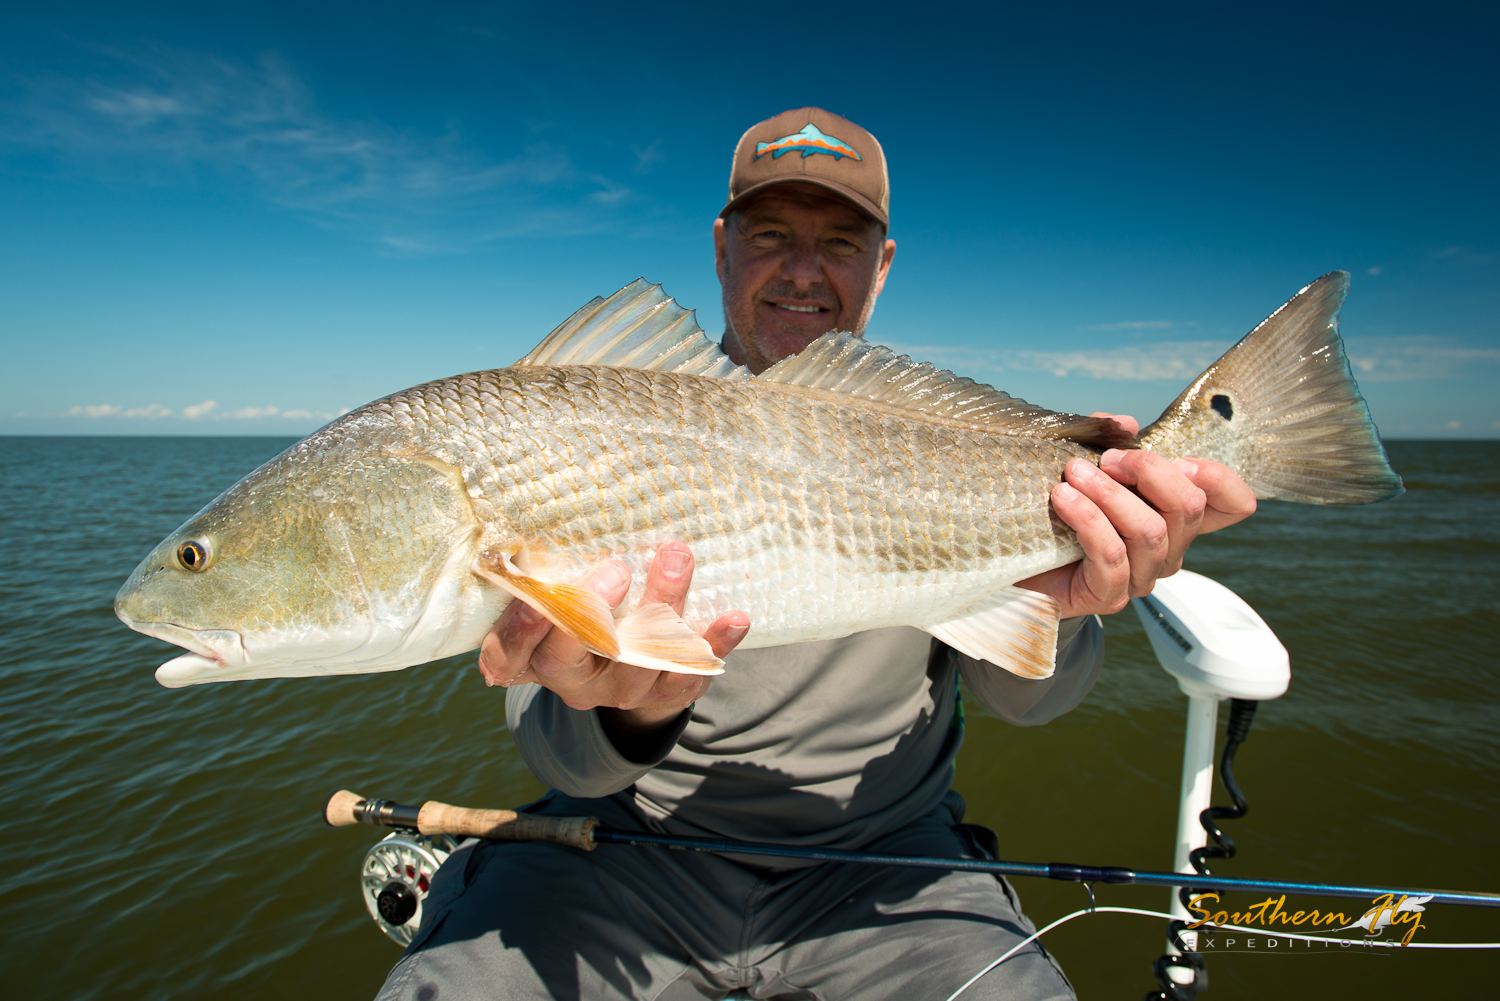 Southern Fly Expeditions Redfish Fishing guide new orleans louisiana 